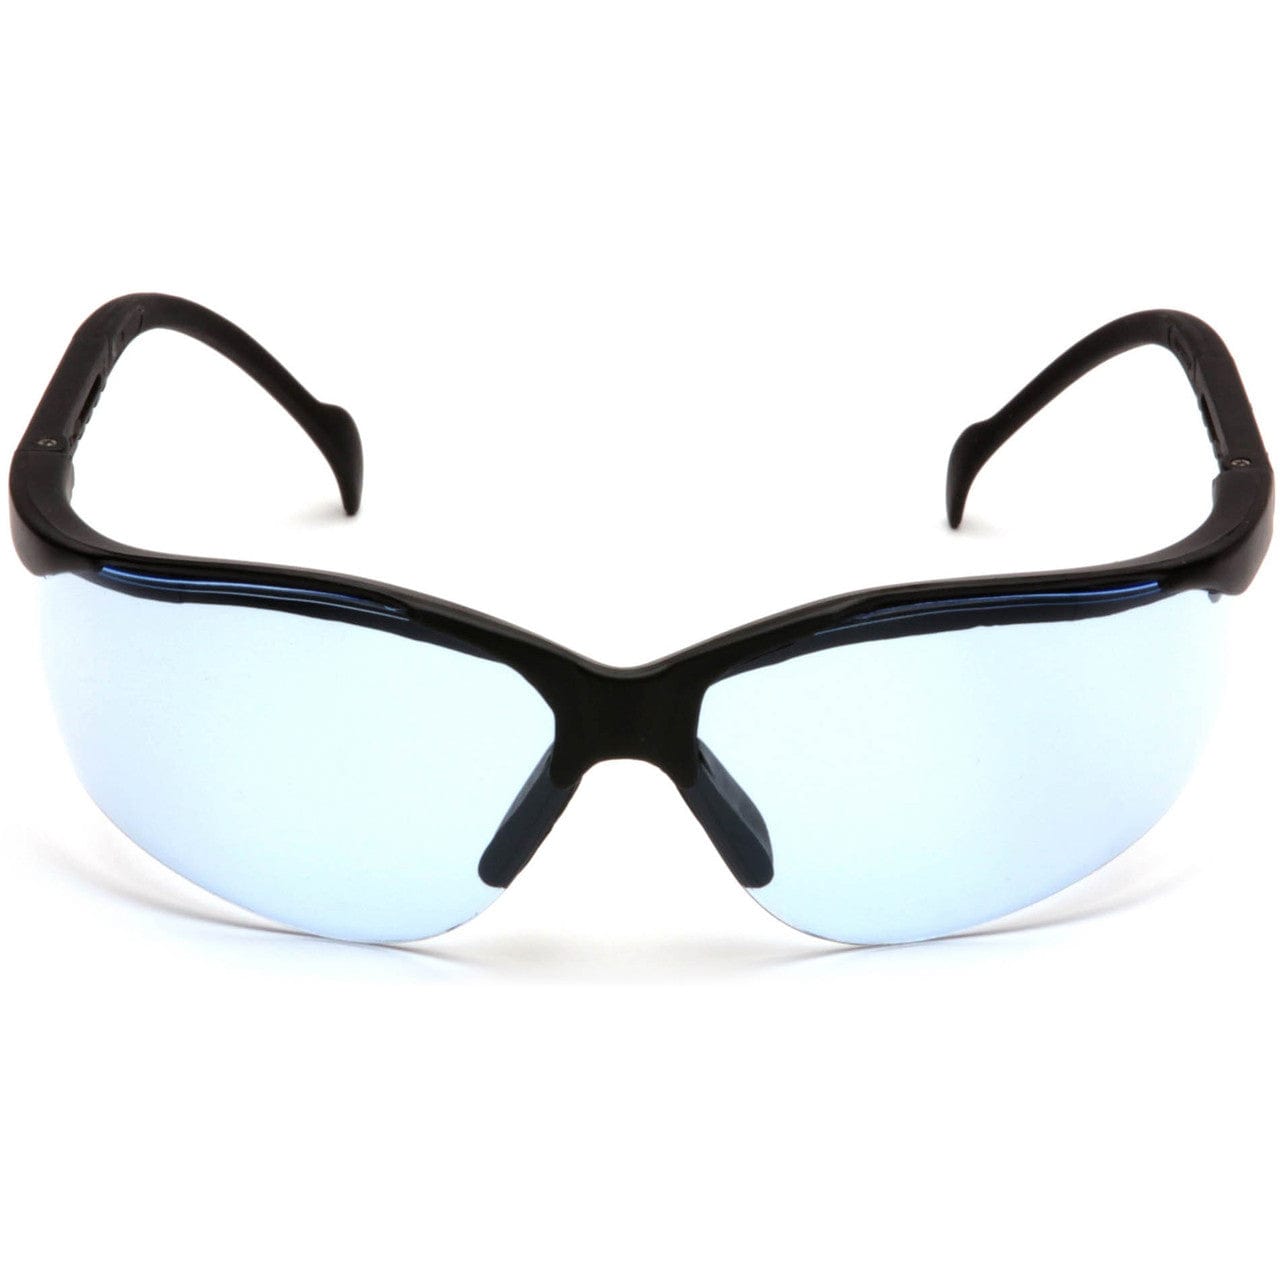 Pyramex Venture 2 Safety Glasses Black Frame Infinity Blue Lens SB1860S Front View